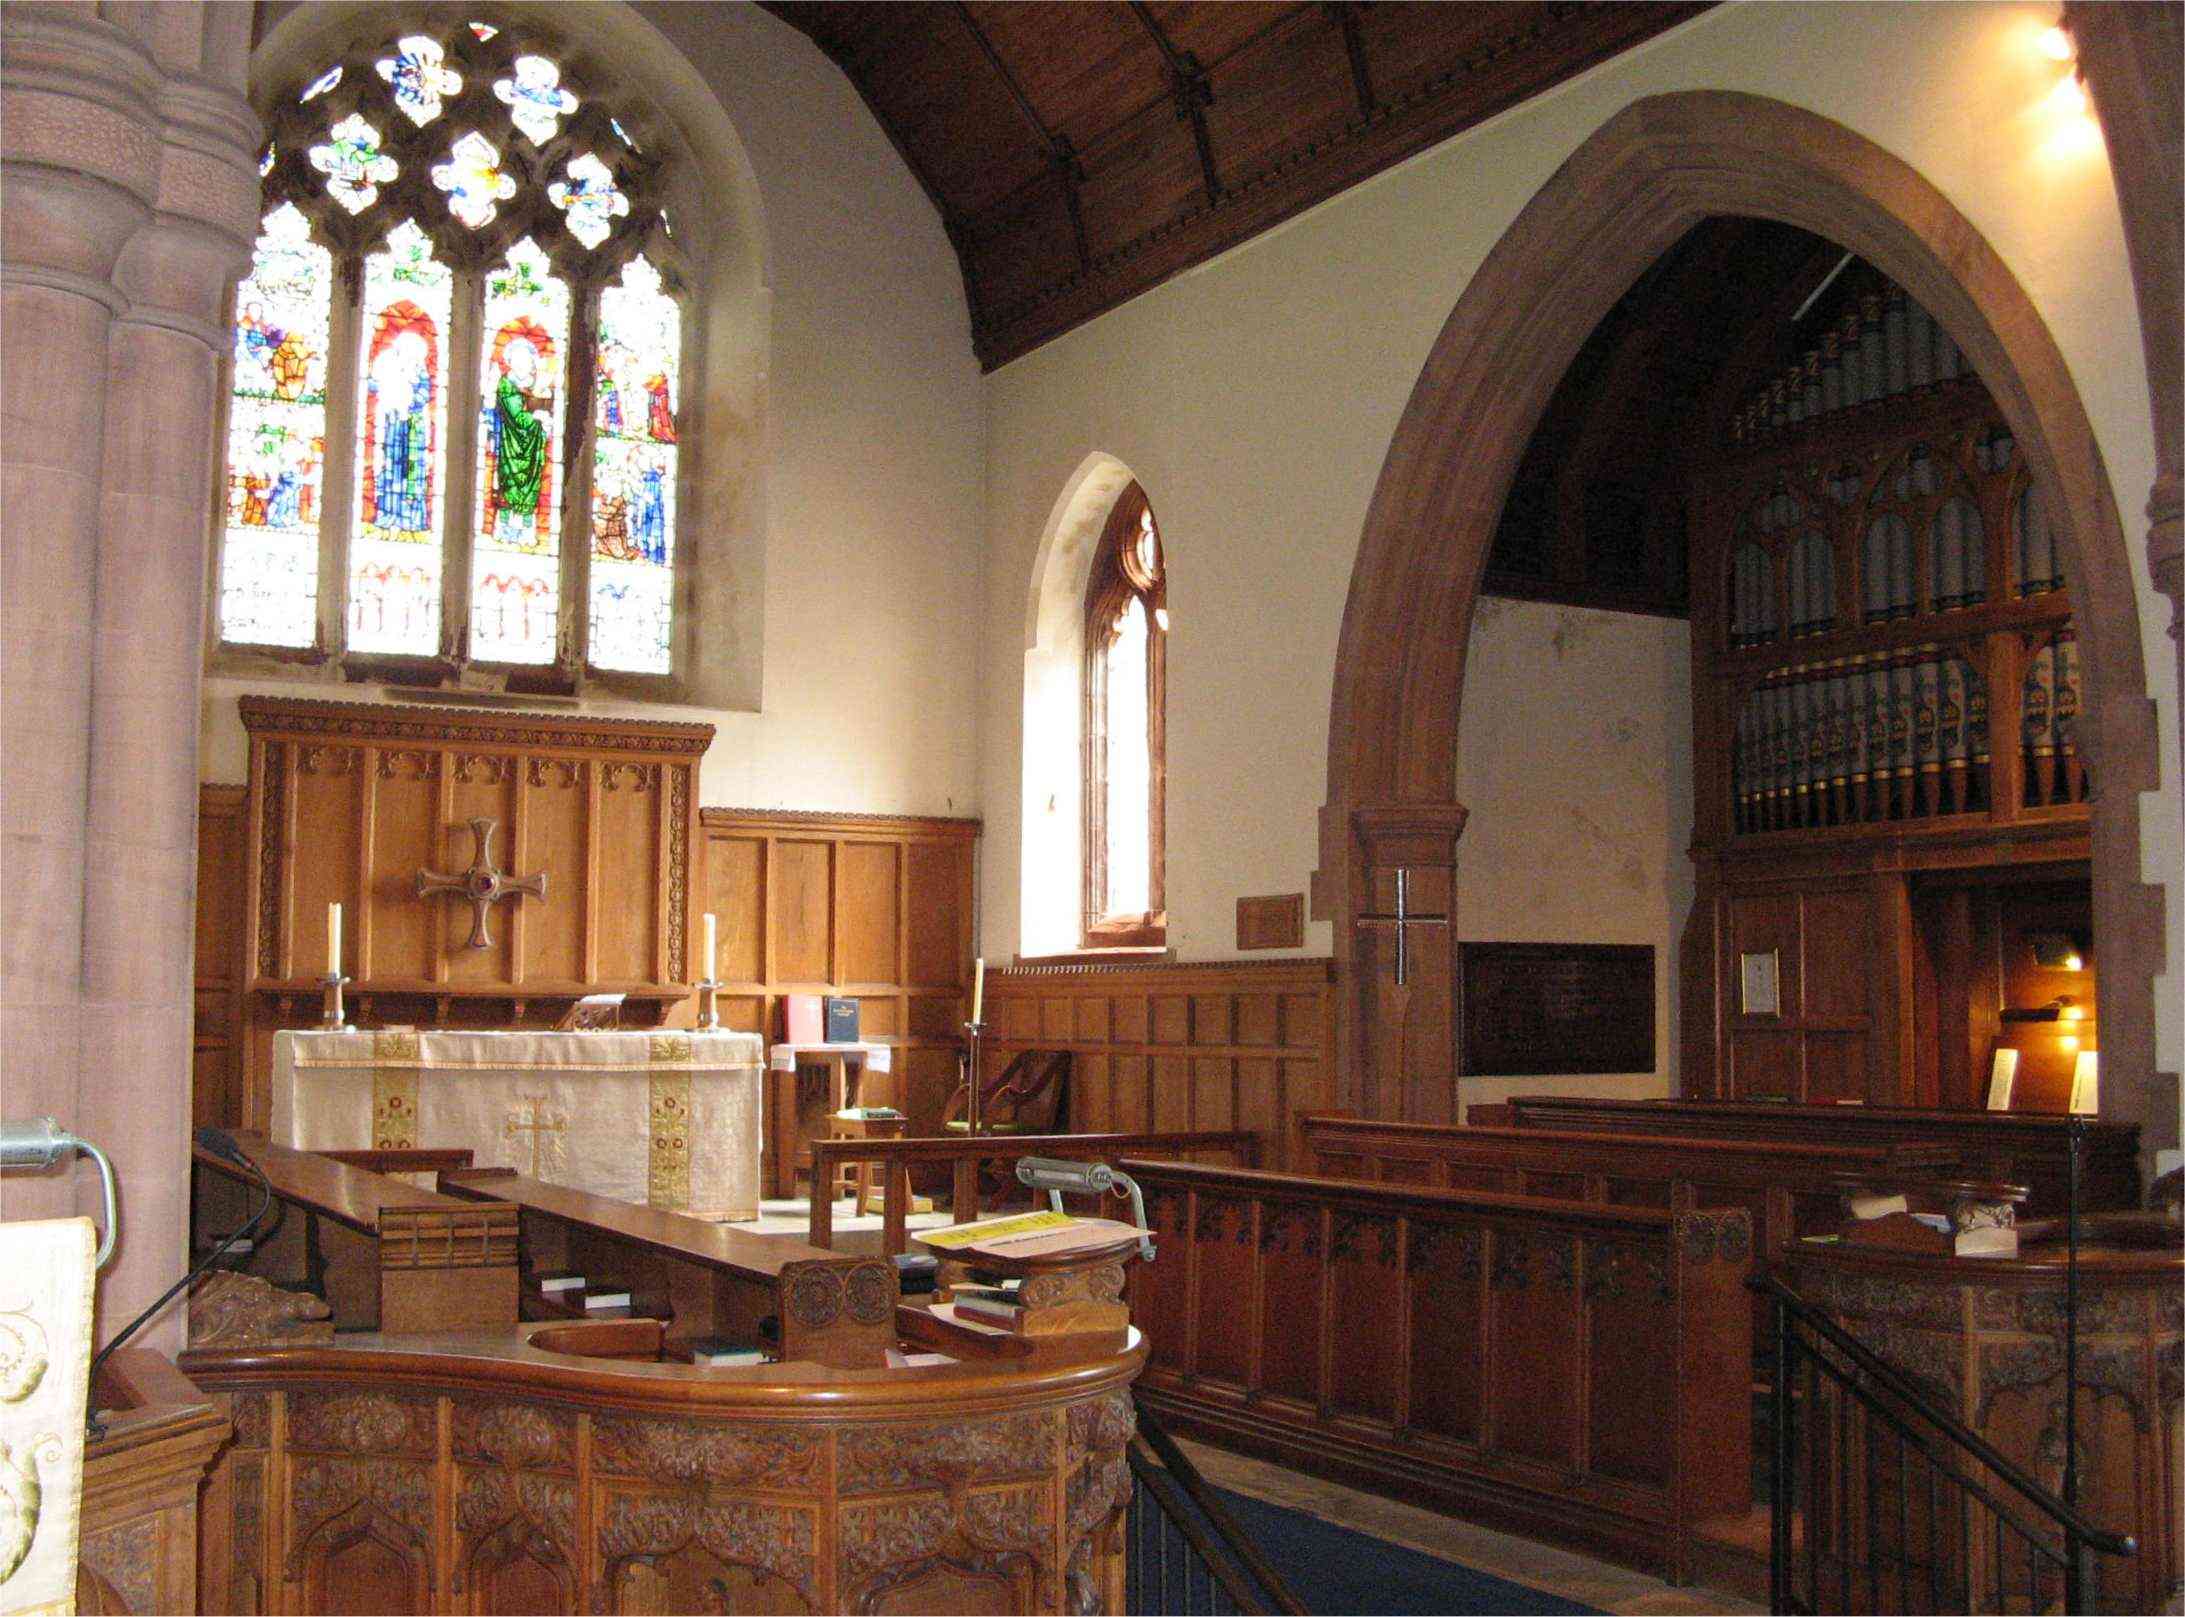 The chancel and organ case